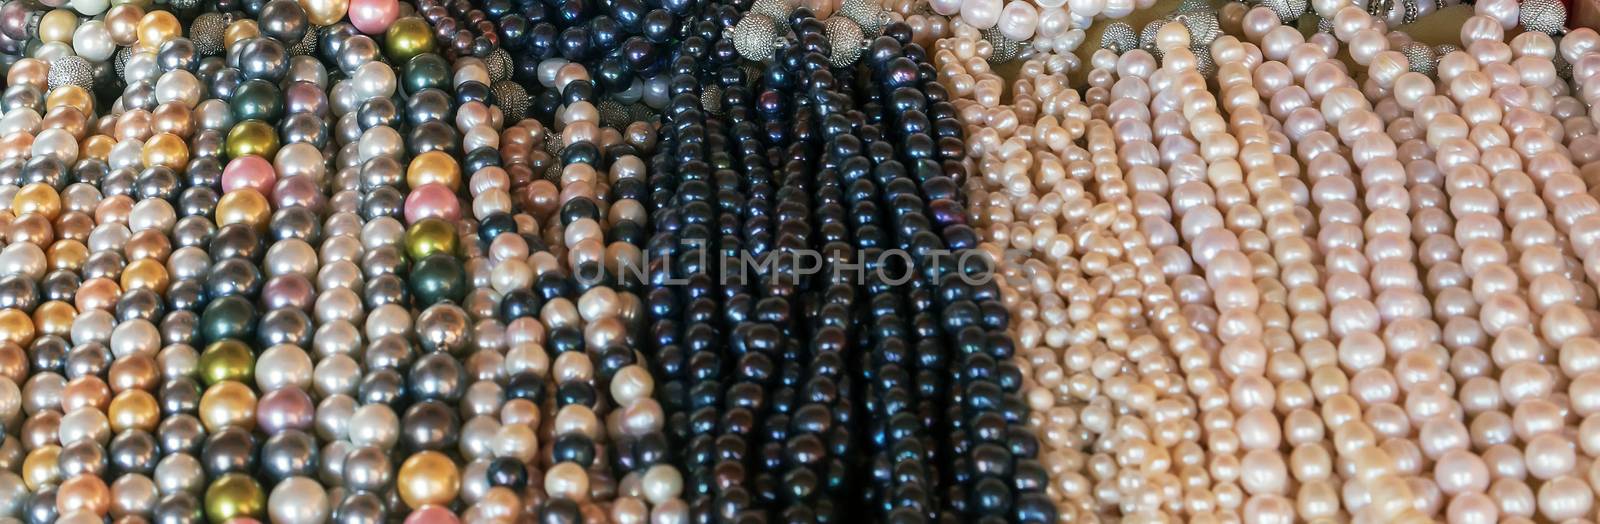 beads necklace pearl black white colour background